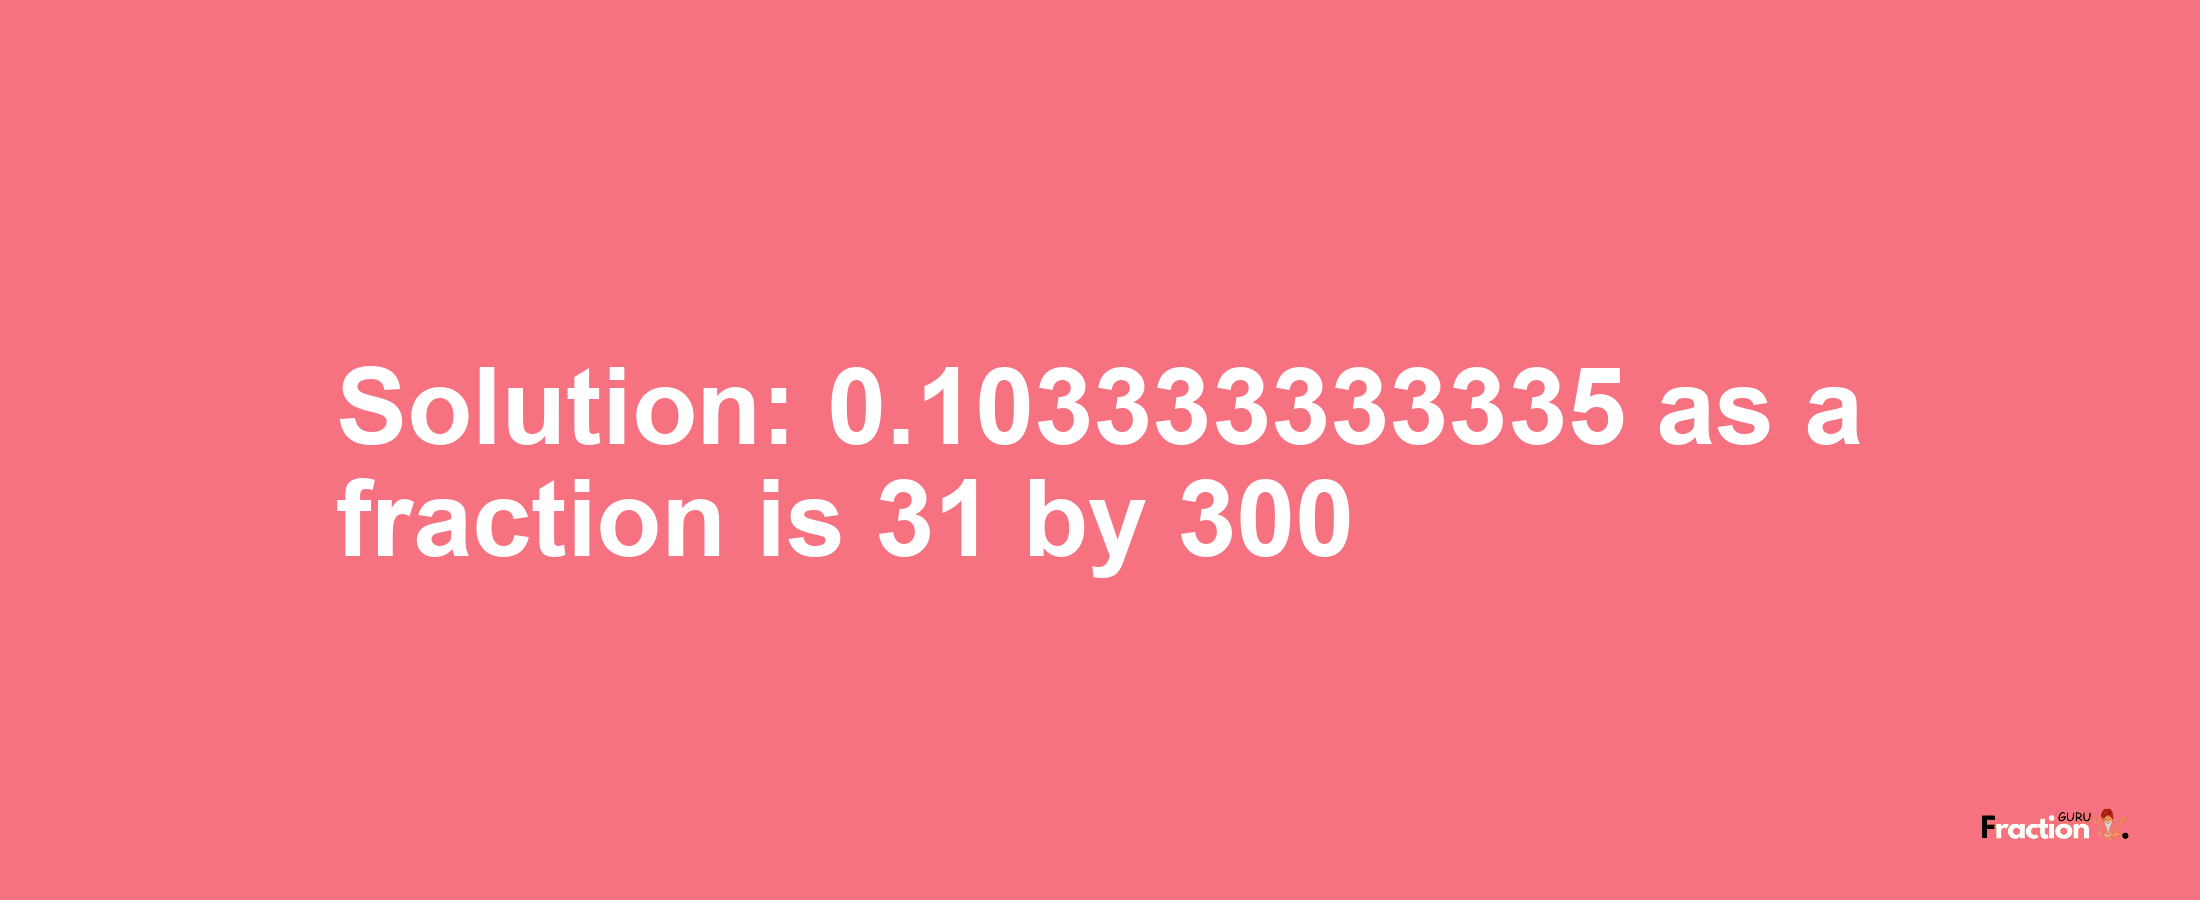 Solution:0.103333333335 as a fraction is 31/300